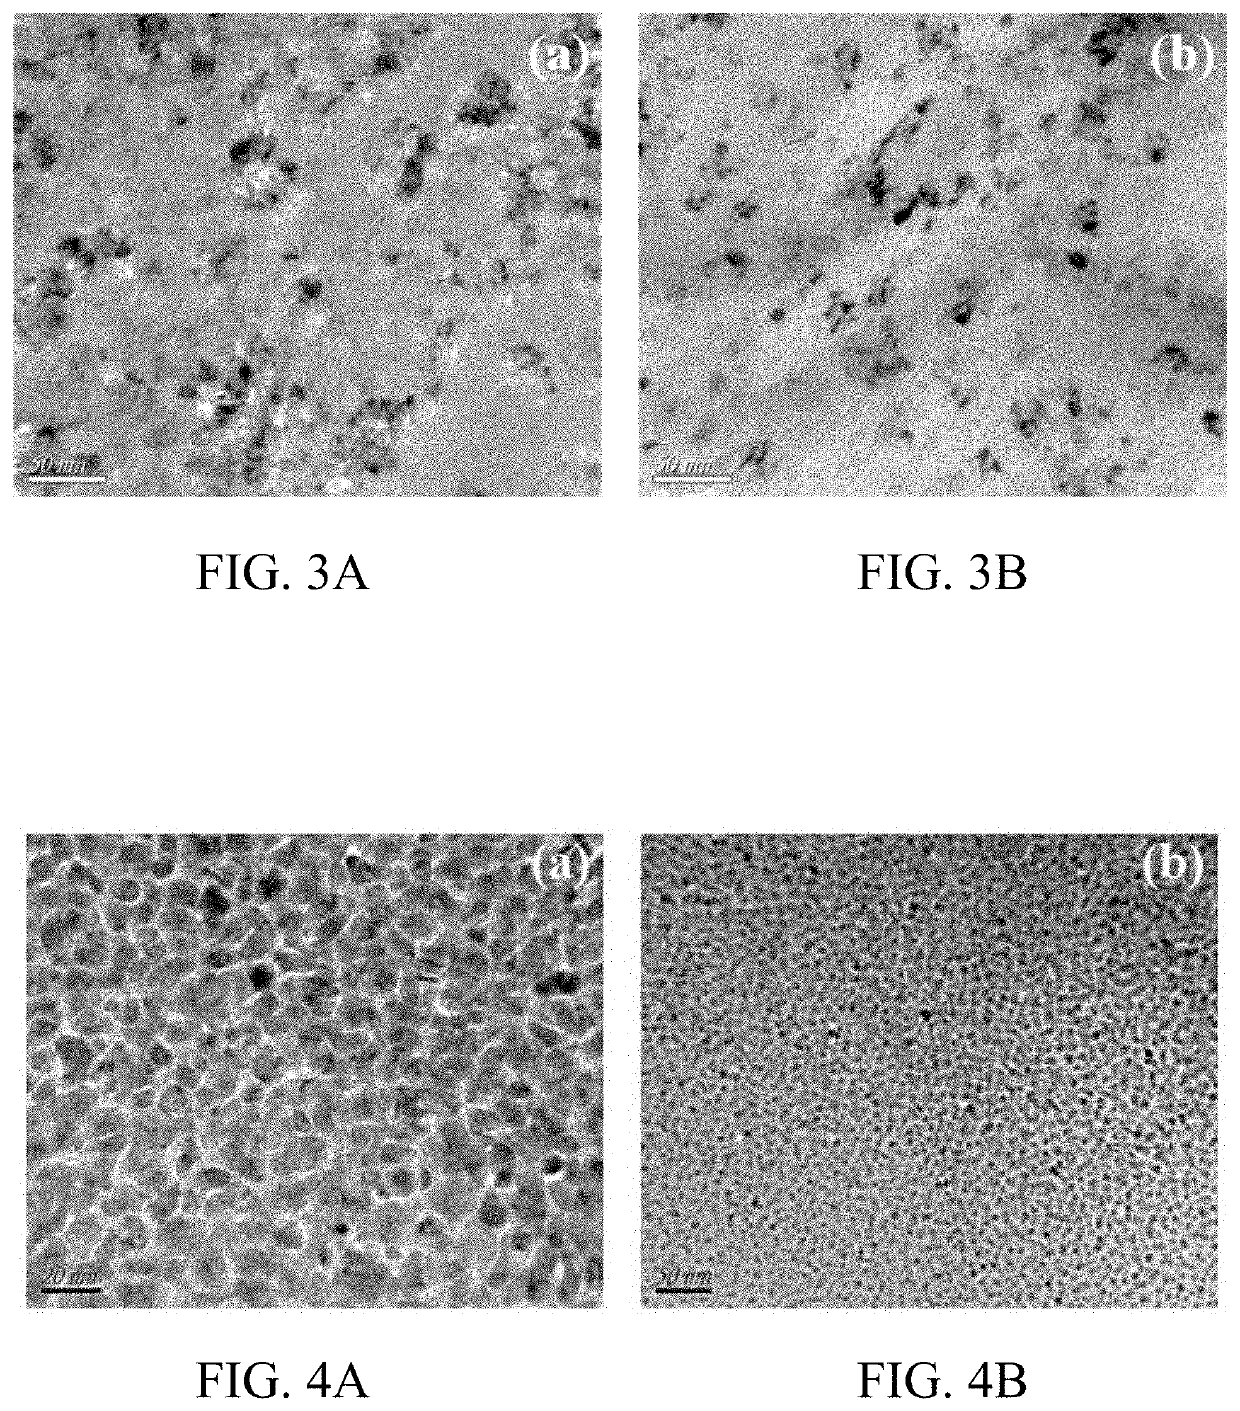 Combined fabricating method for gradient nanostructure in surface layer of metal workpiece